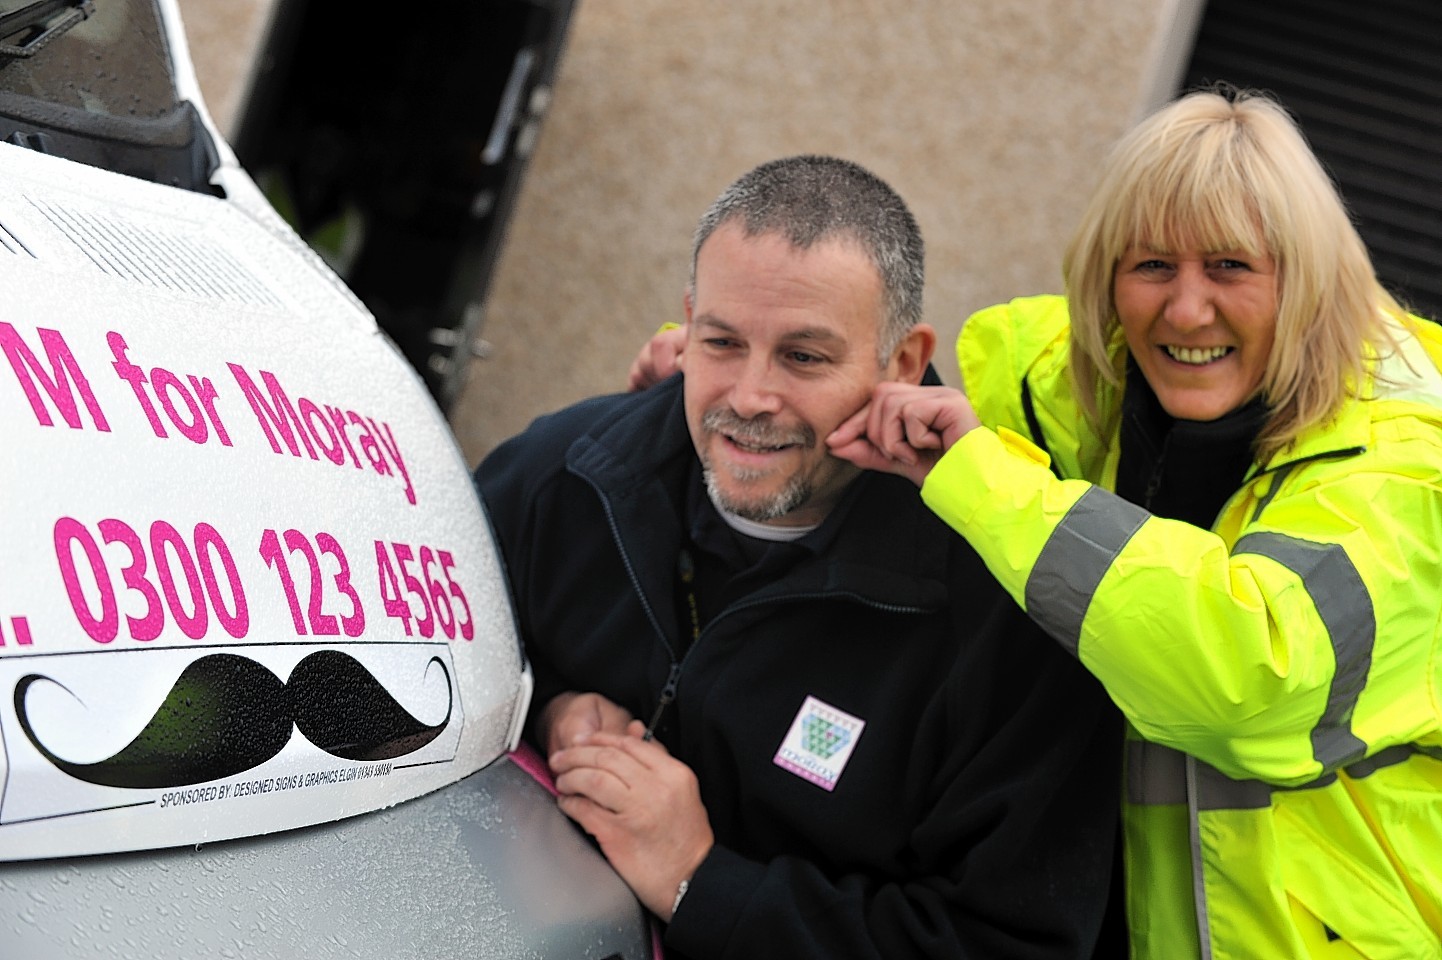 Bus bosses have thrown their support behind Movember